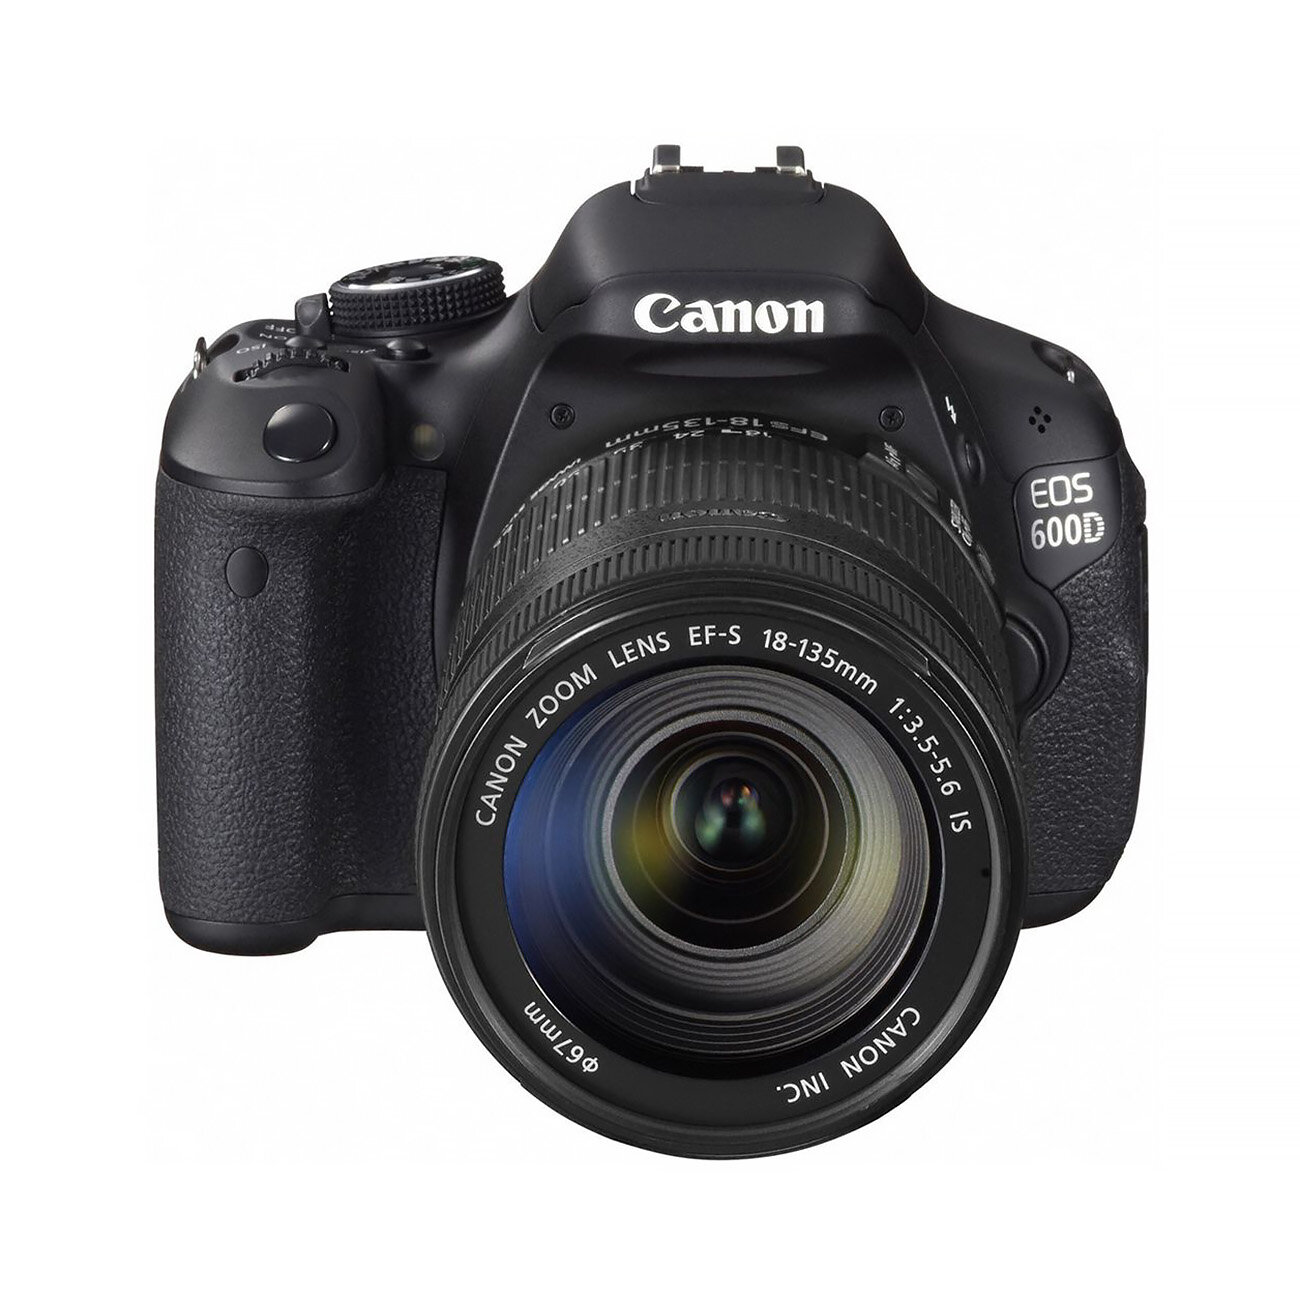 Canon EOS 600D Kit 18-135mm F/3.5-5.6 IS